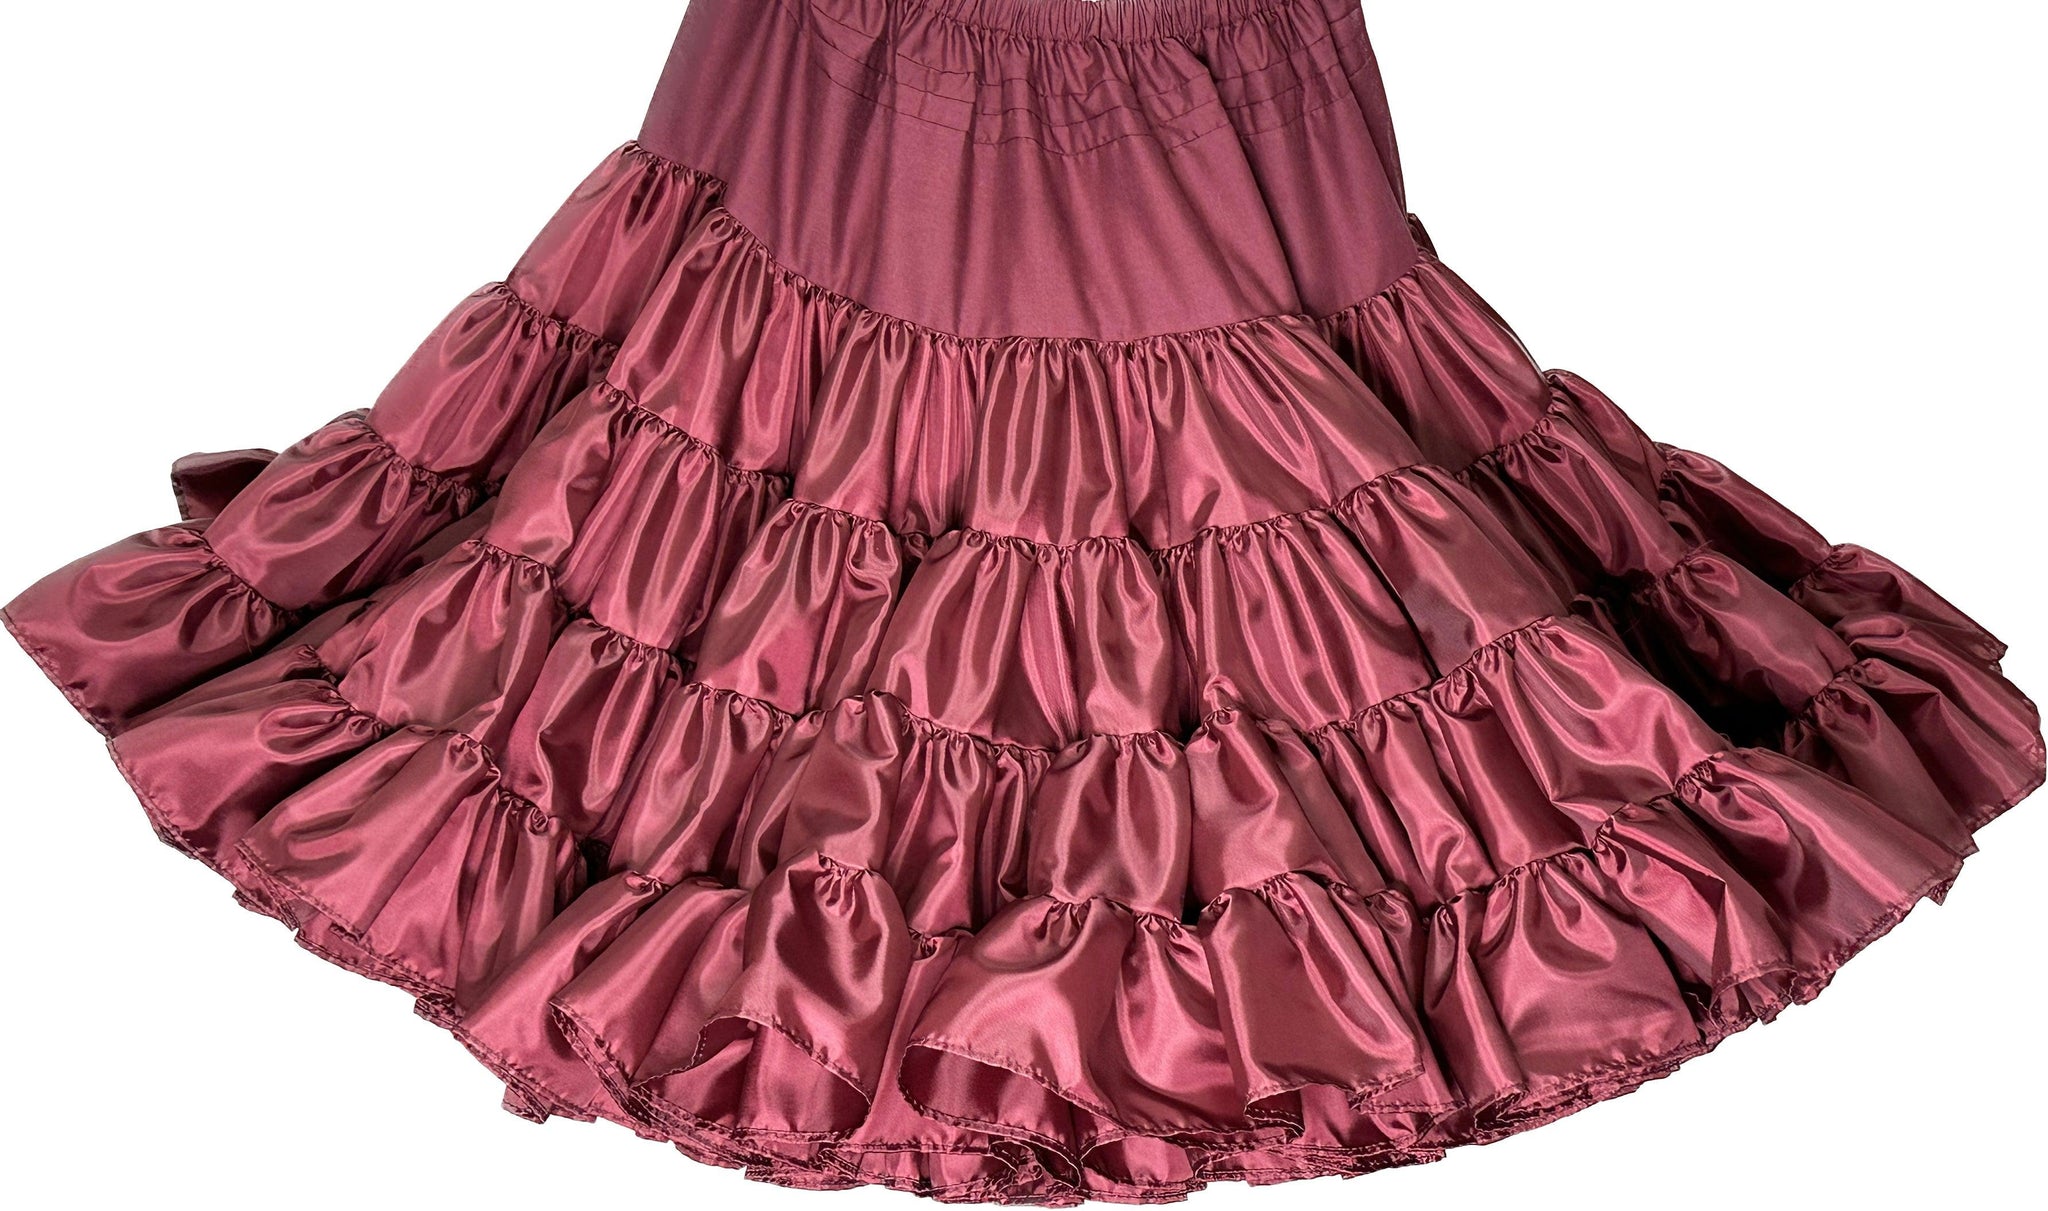 Soft Poly-Liner Petticoat - Square Up Fashions